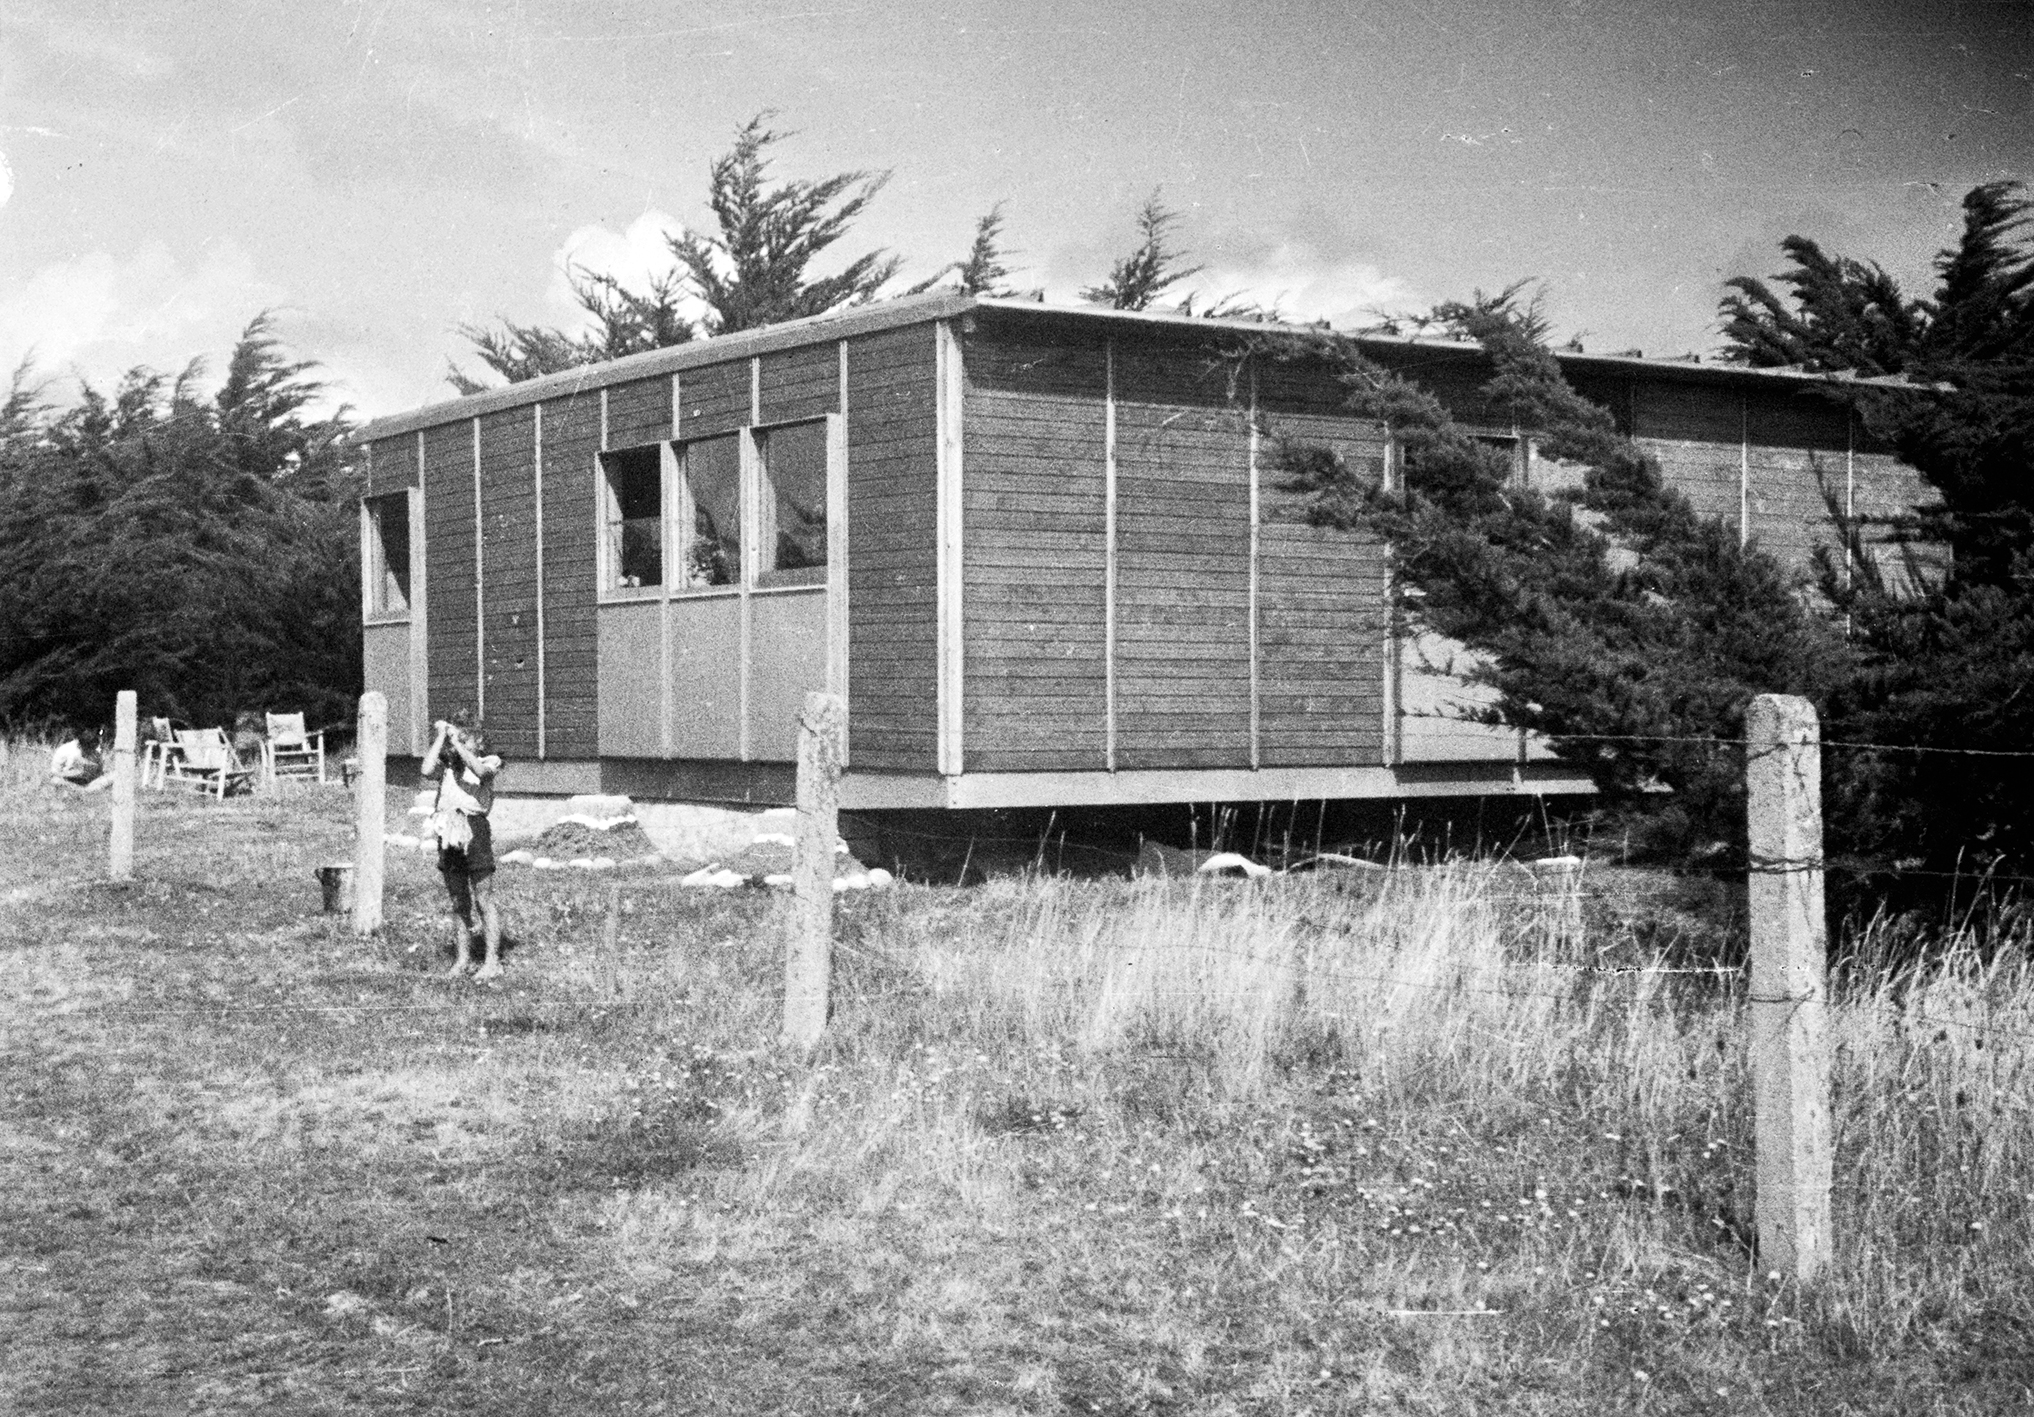 8x8 Demountable house. Prototype assembled during the summer for the Prouvé family’s vacation, Carnac, 1946.